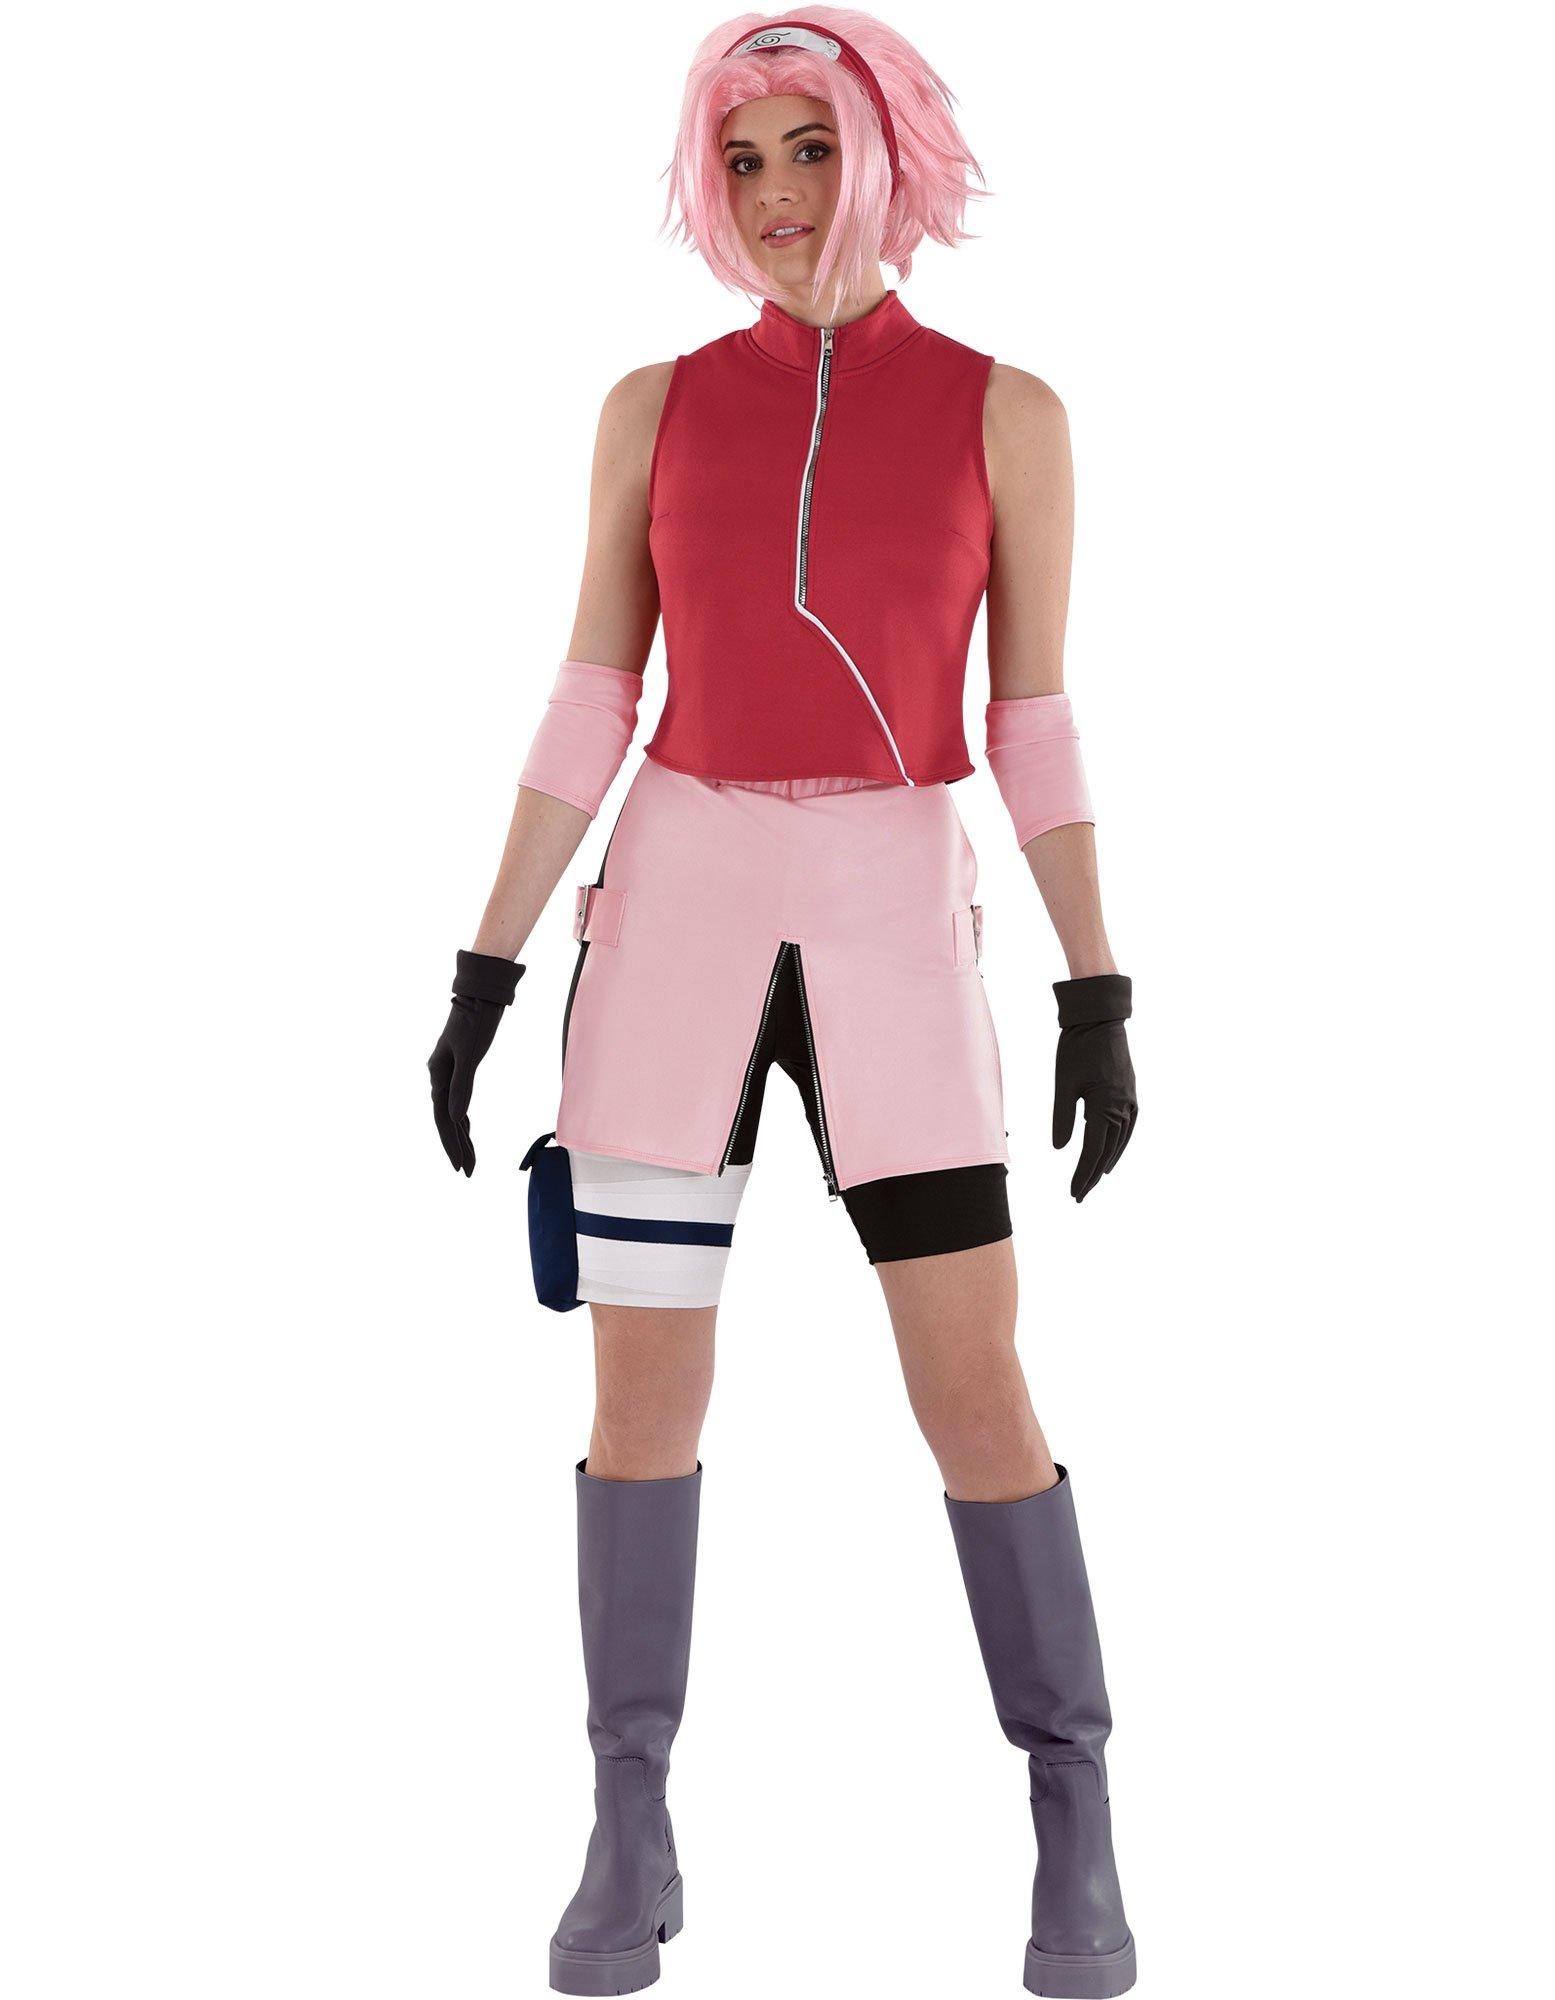 Halloween Clothes Vest Shirt Pants Mask  Naruto Costume Accessories -  Anime Cosplay - Aliexpress